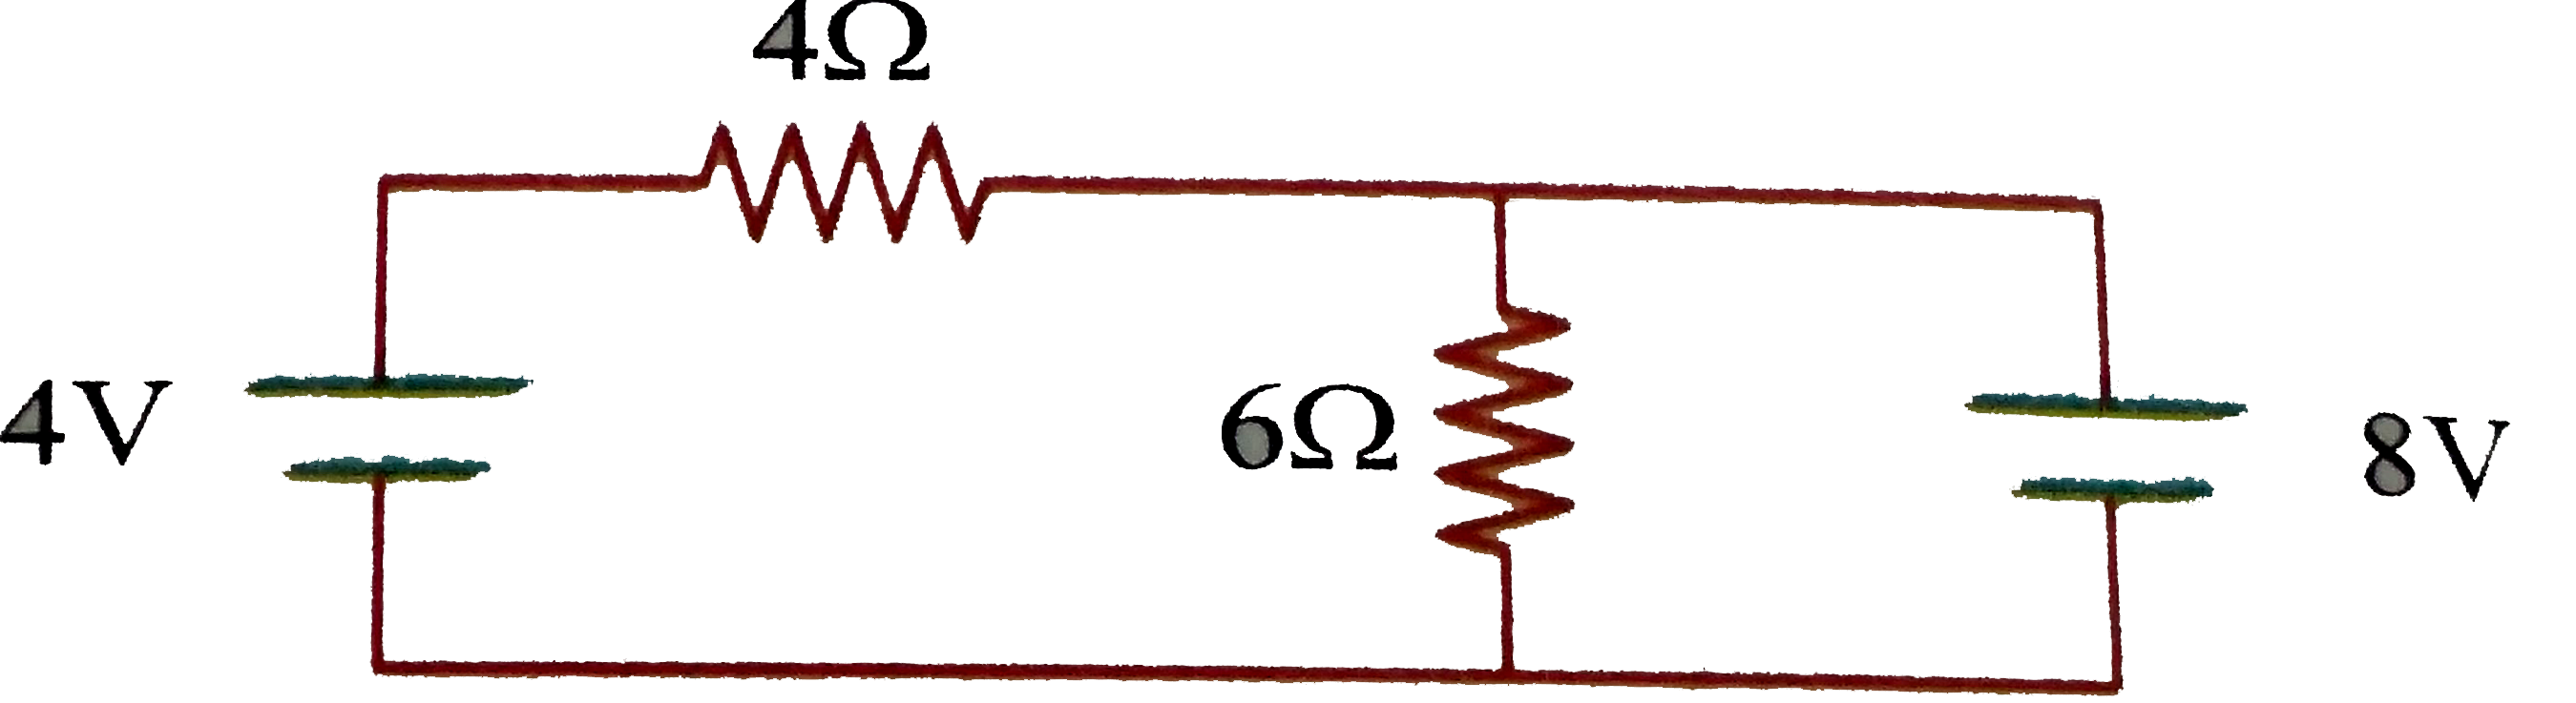 Two cells of emf 4 V and 8 V are connected to two resistor 4Omega and 6Omega as shown. If 8 V cell is short circuited. Then current through resistance 4Omega and 6Omega